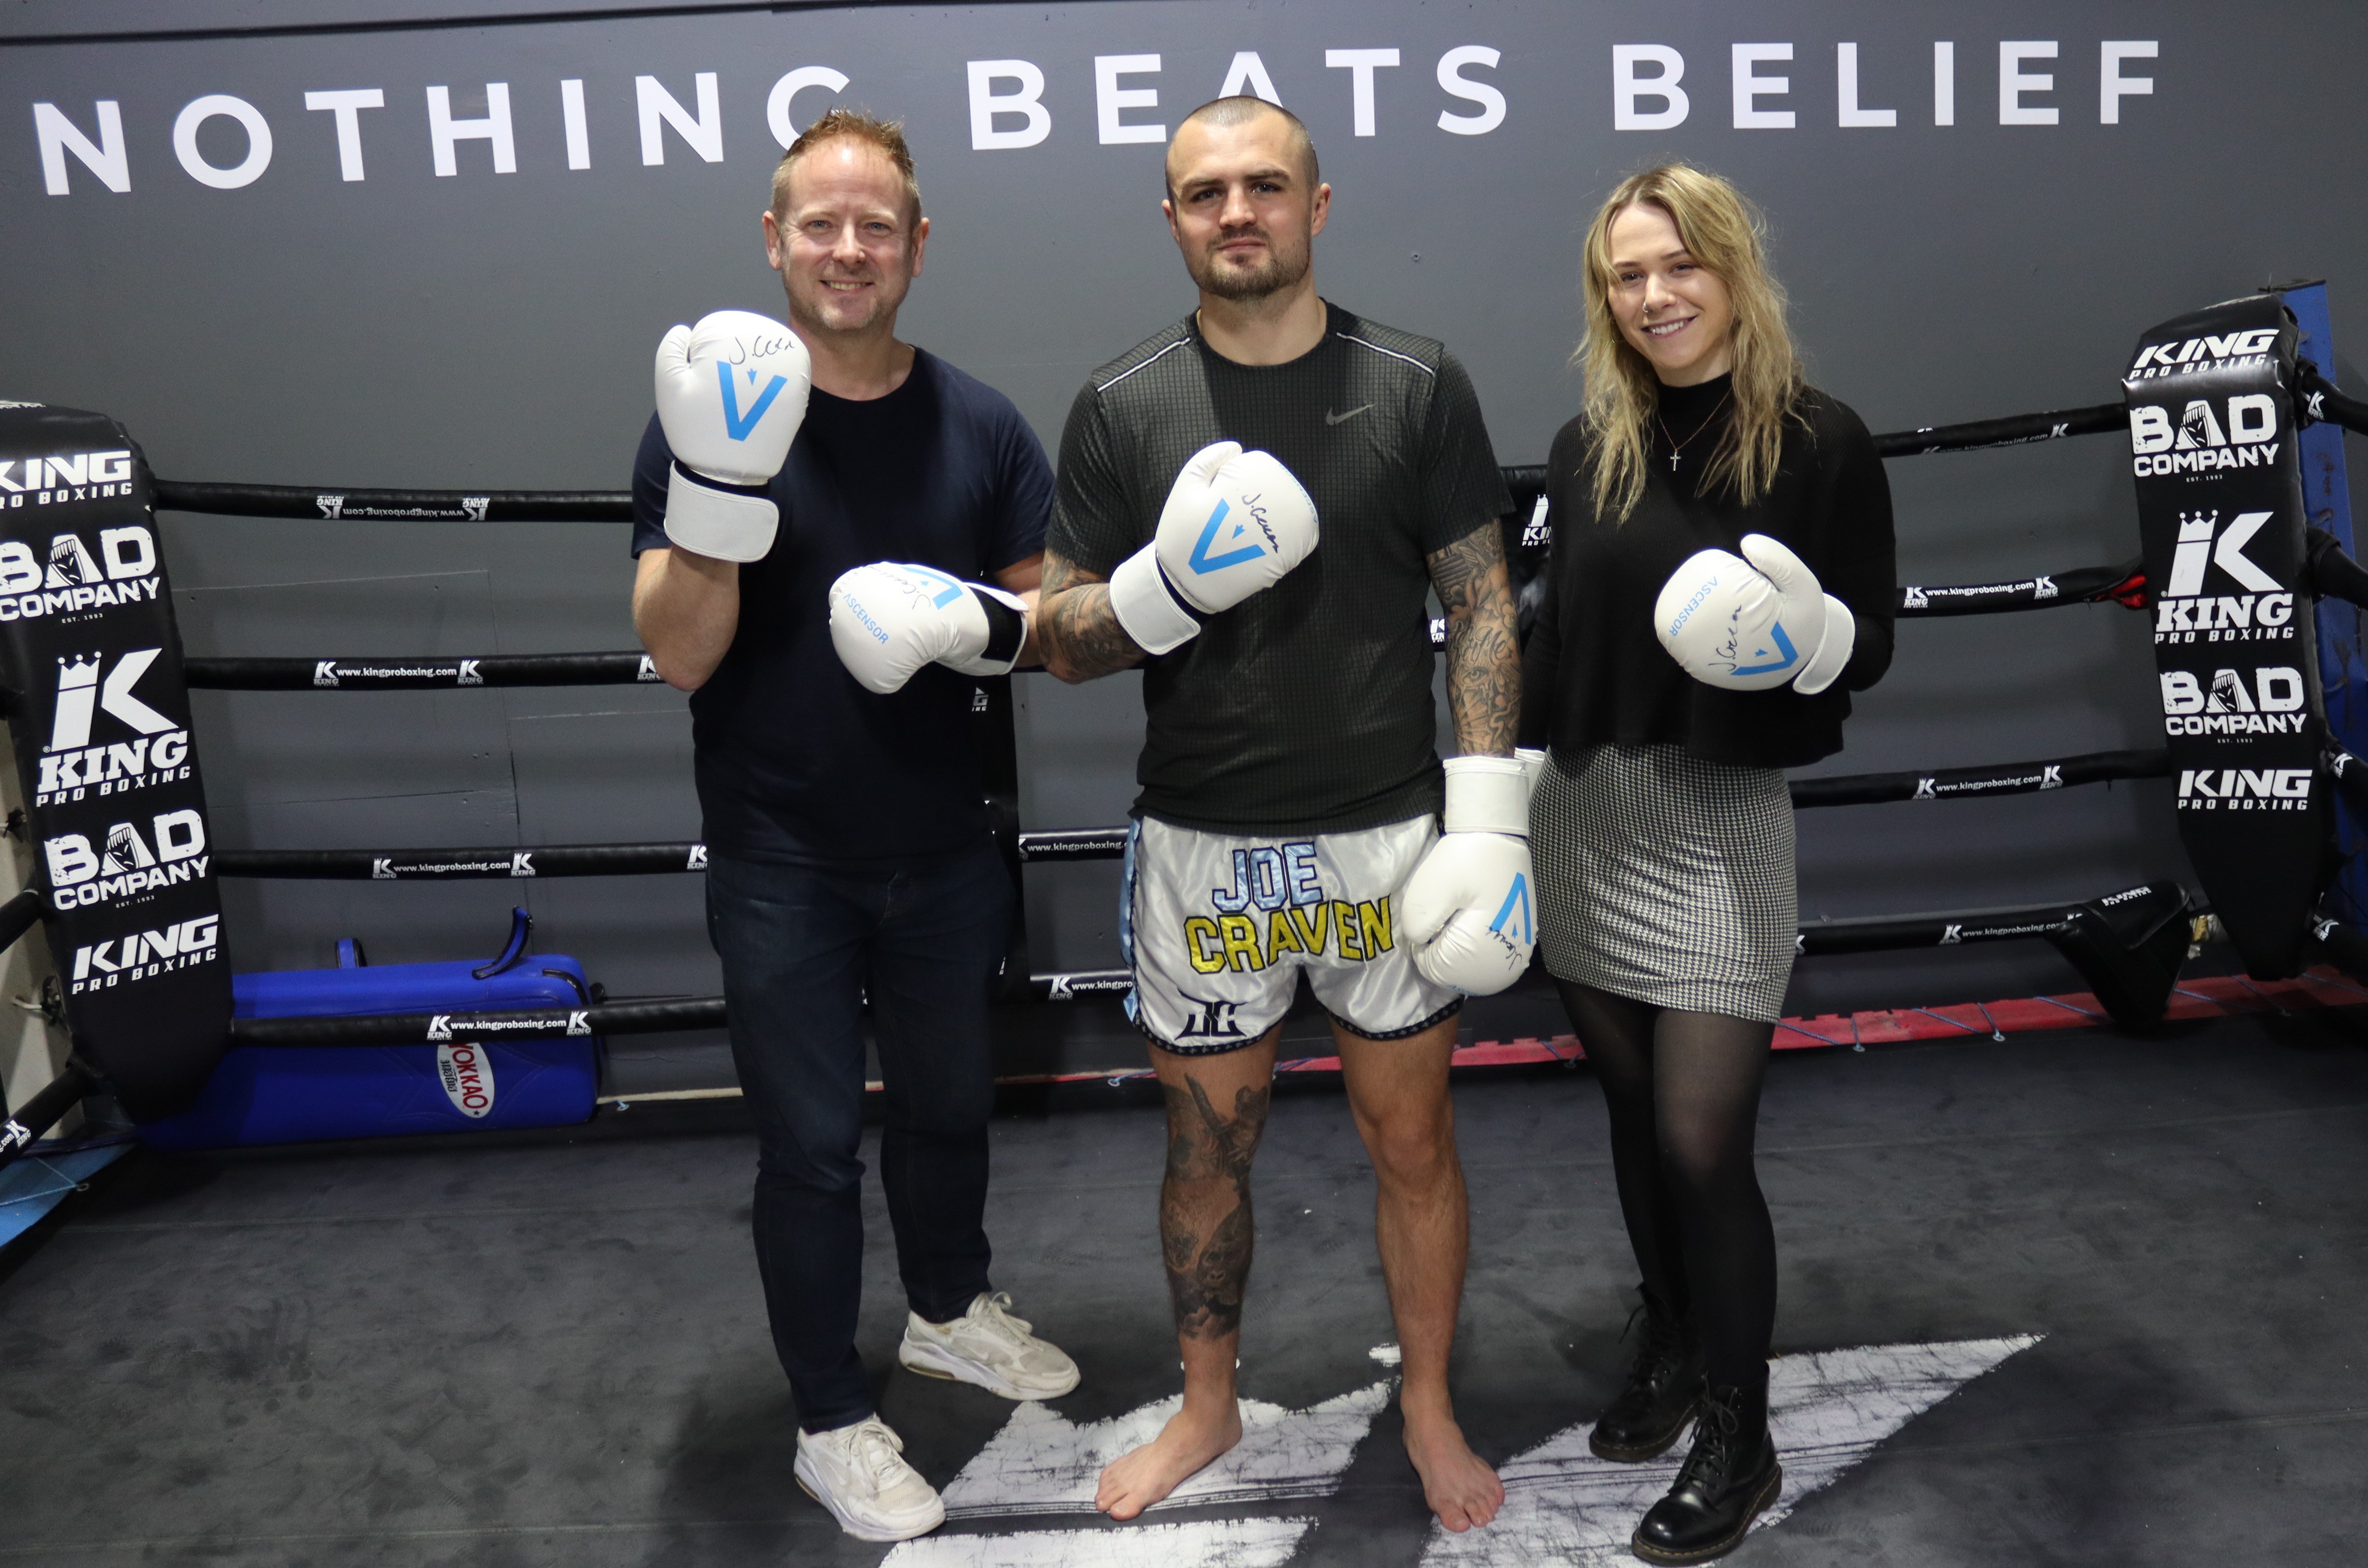 #1 conversion agency joins forces with #1 Thai boxer